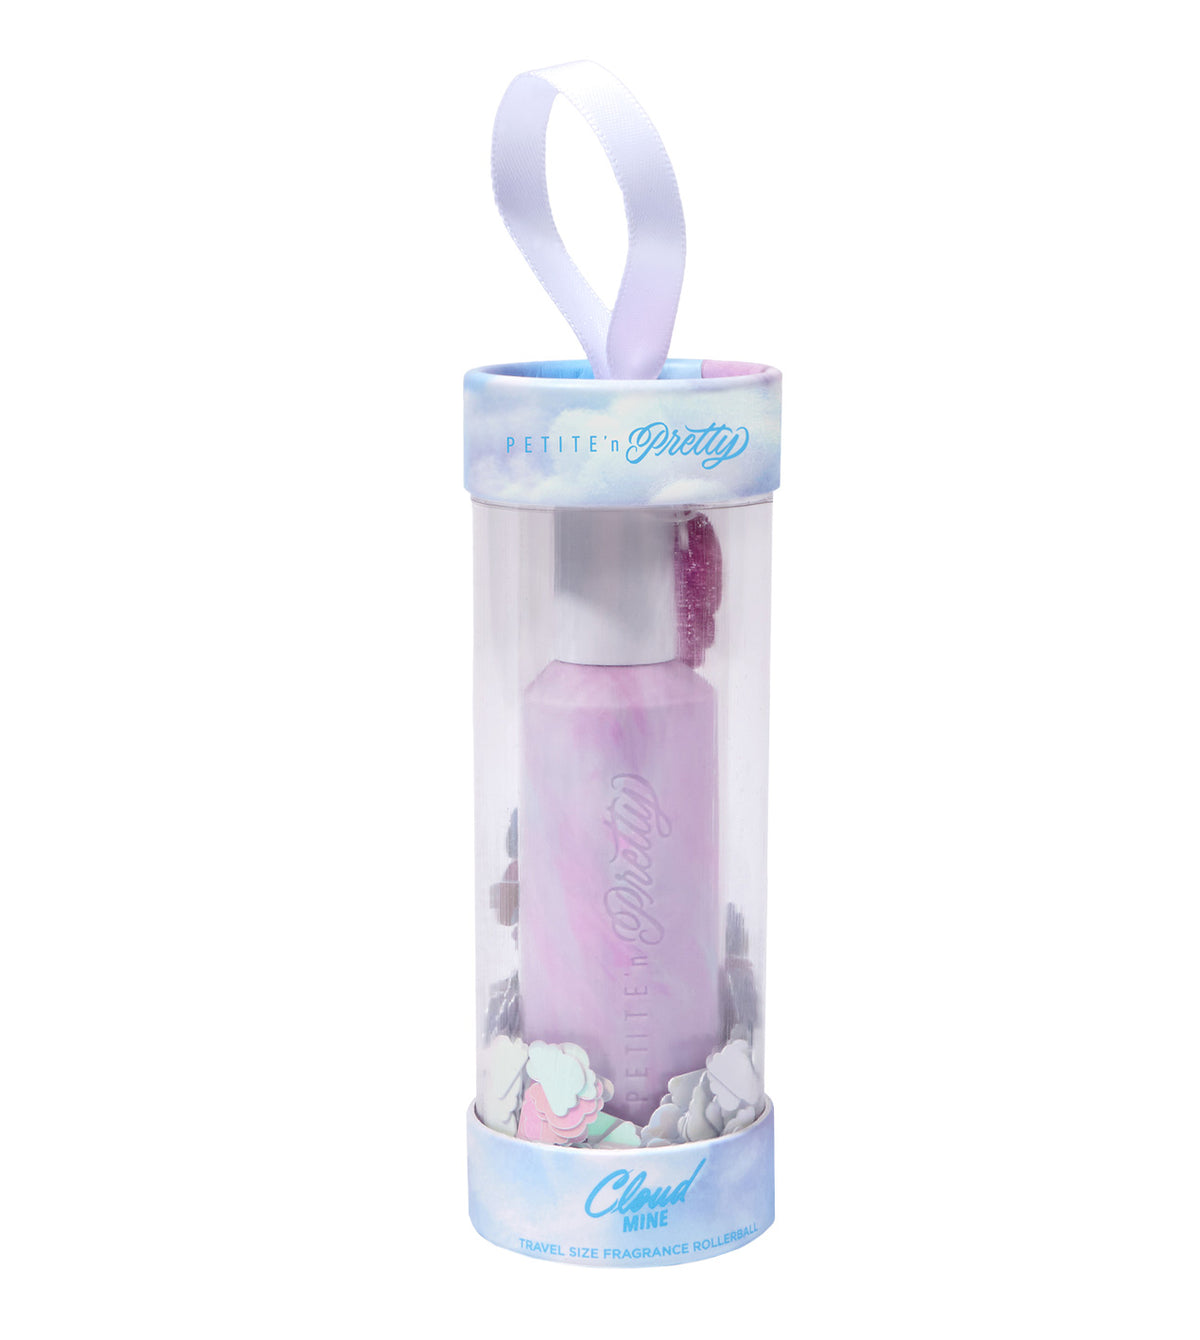 Cloud Mine Travel Size Fragrance Holiday Rollerball